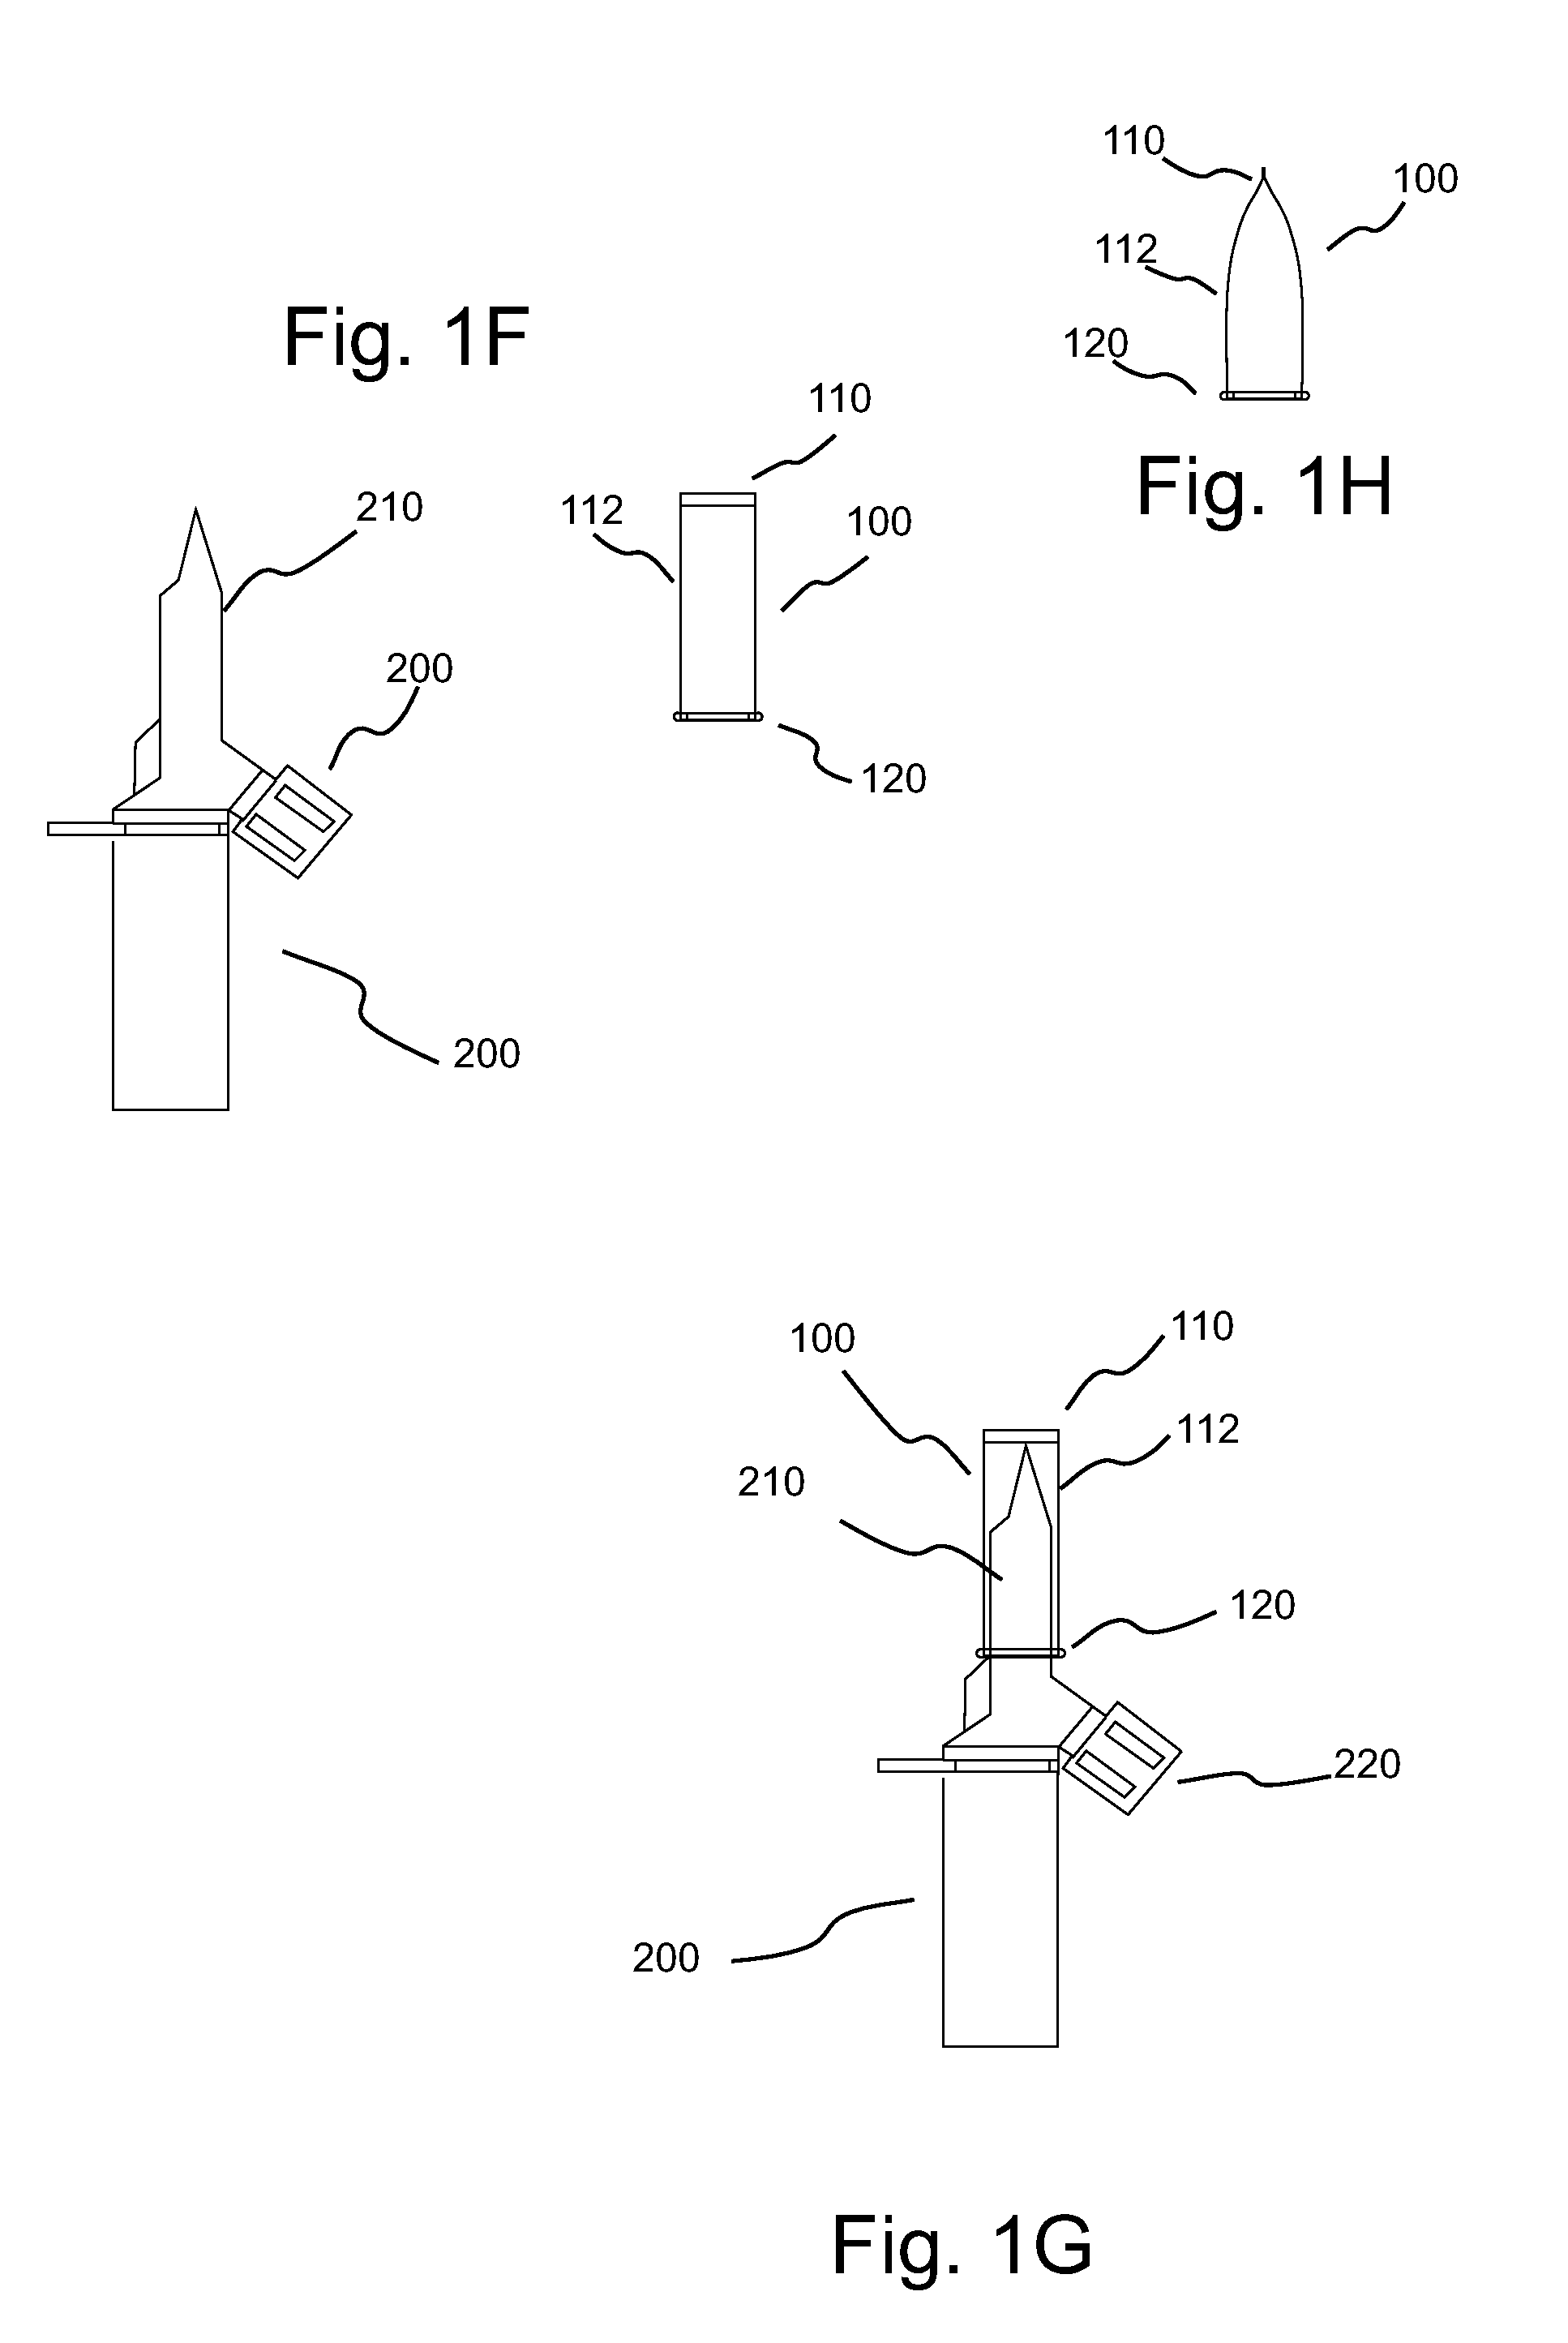 Fluid path connectors and container spikes for fluid delivery